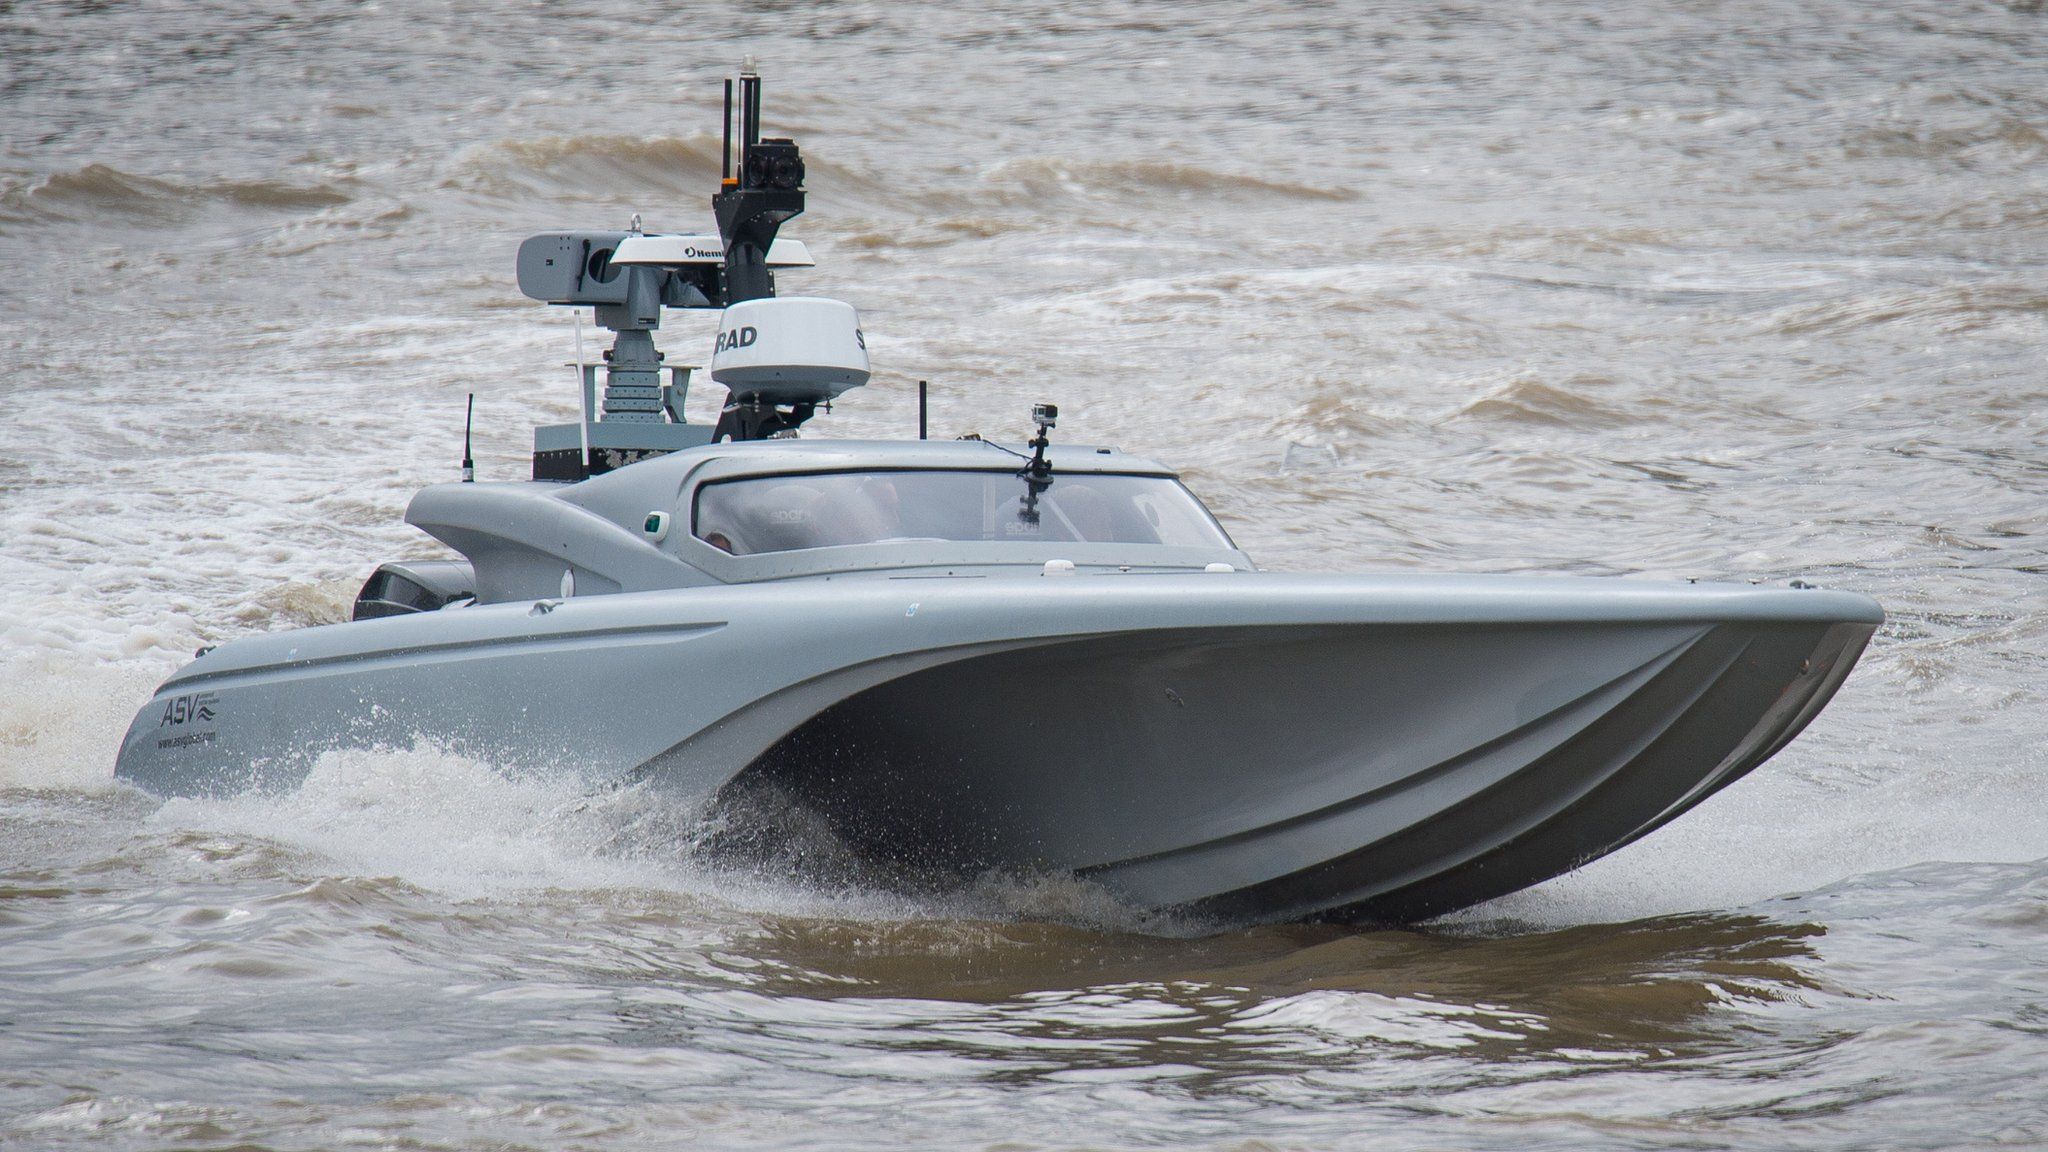 Unmanned military boat on Thames